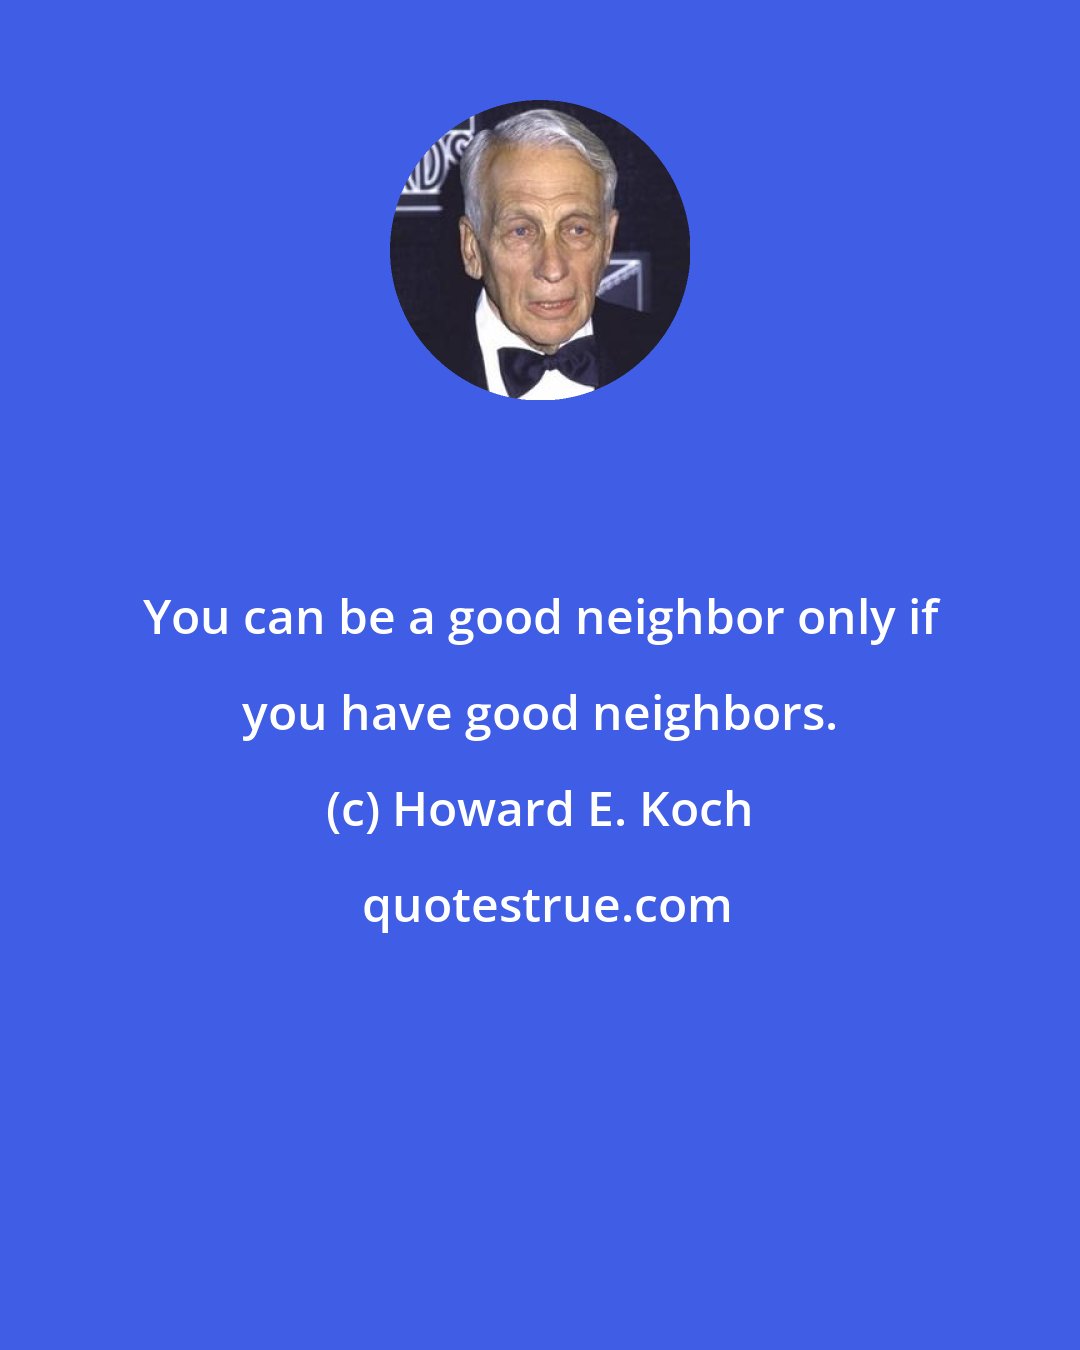 Howard E. Koch: You can be a good neighbor only if you have good neighbors.